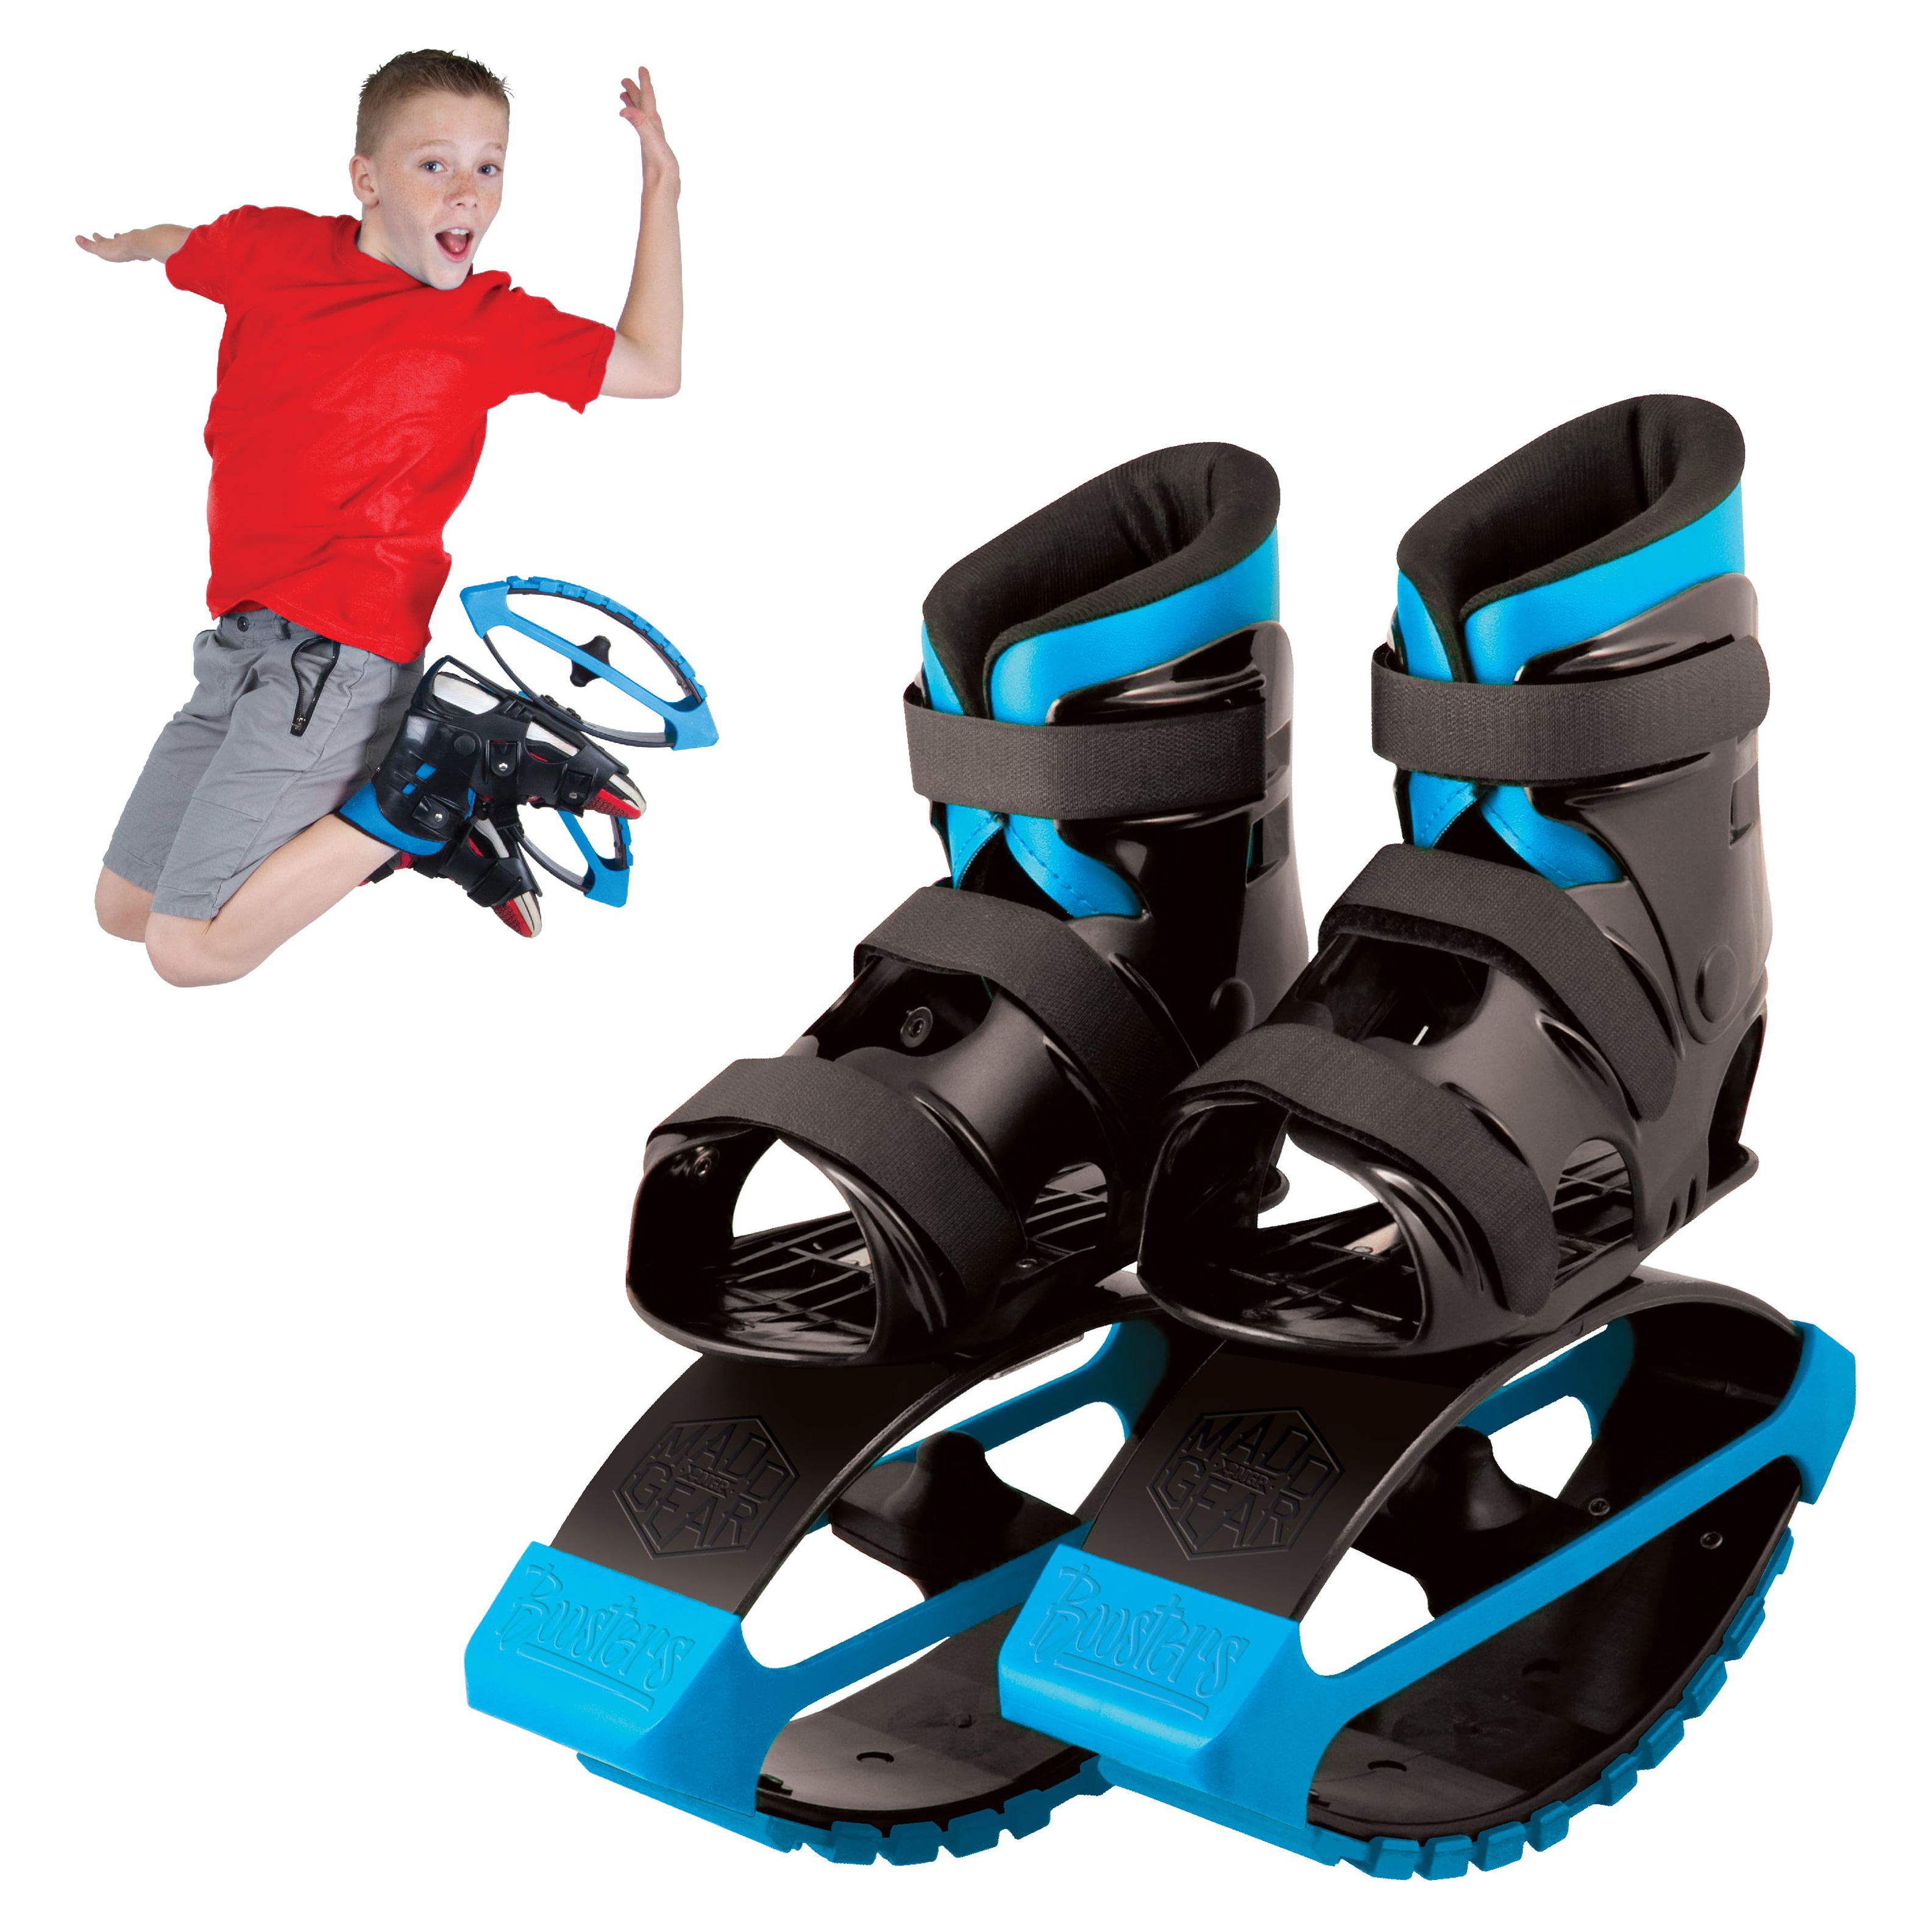 MGP Action Sports – BOOST BOOTS – Kids Jumping Shoes – Black Blue – Suites Boys & Girls Ages 5+ - Max User Weight 88lbs – 3 Year Manufacturer’s Warranty - image 1 of 9